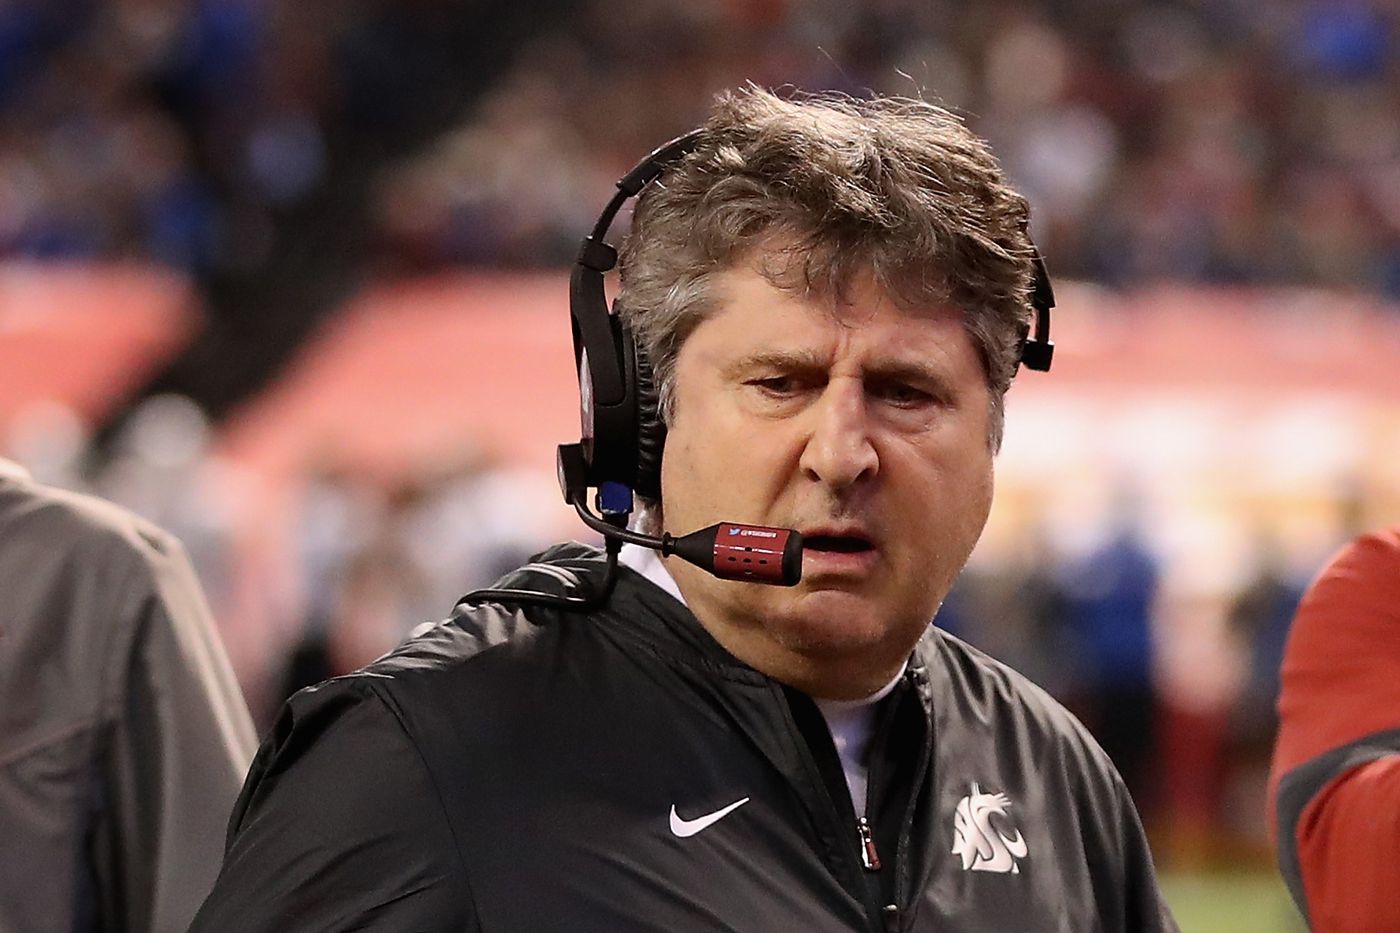 Mississippi State coach Mike Leach, being taken by ambulance to the hospital when a "personal health issue" occurred at home